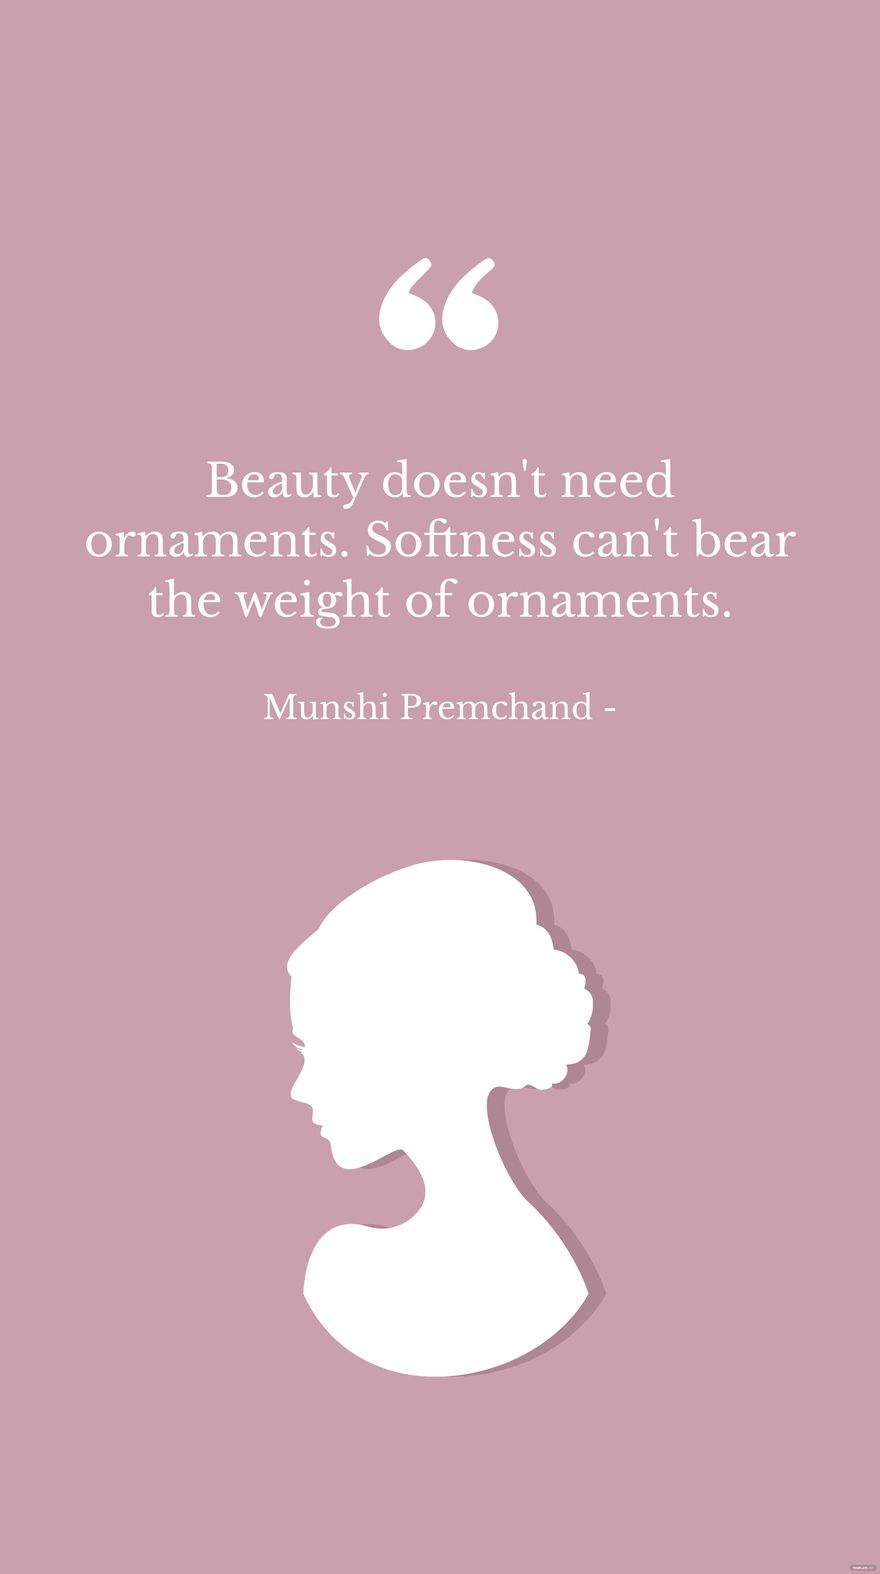 Free Munshi Premchand - Beauty doesn't need ornaments. Softness can't bear the weight of ornaments. in JPG